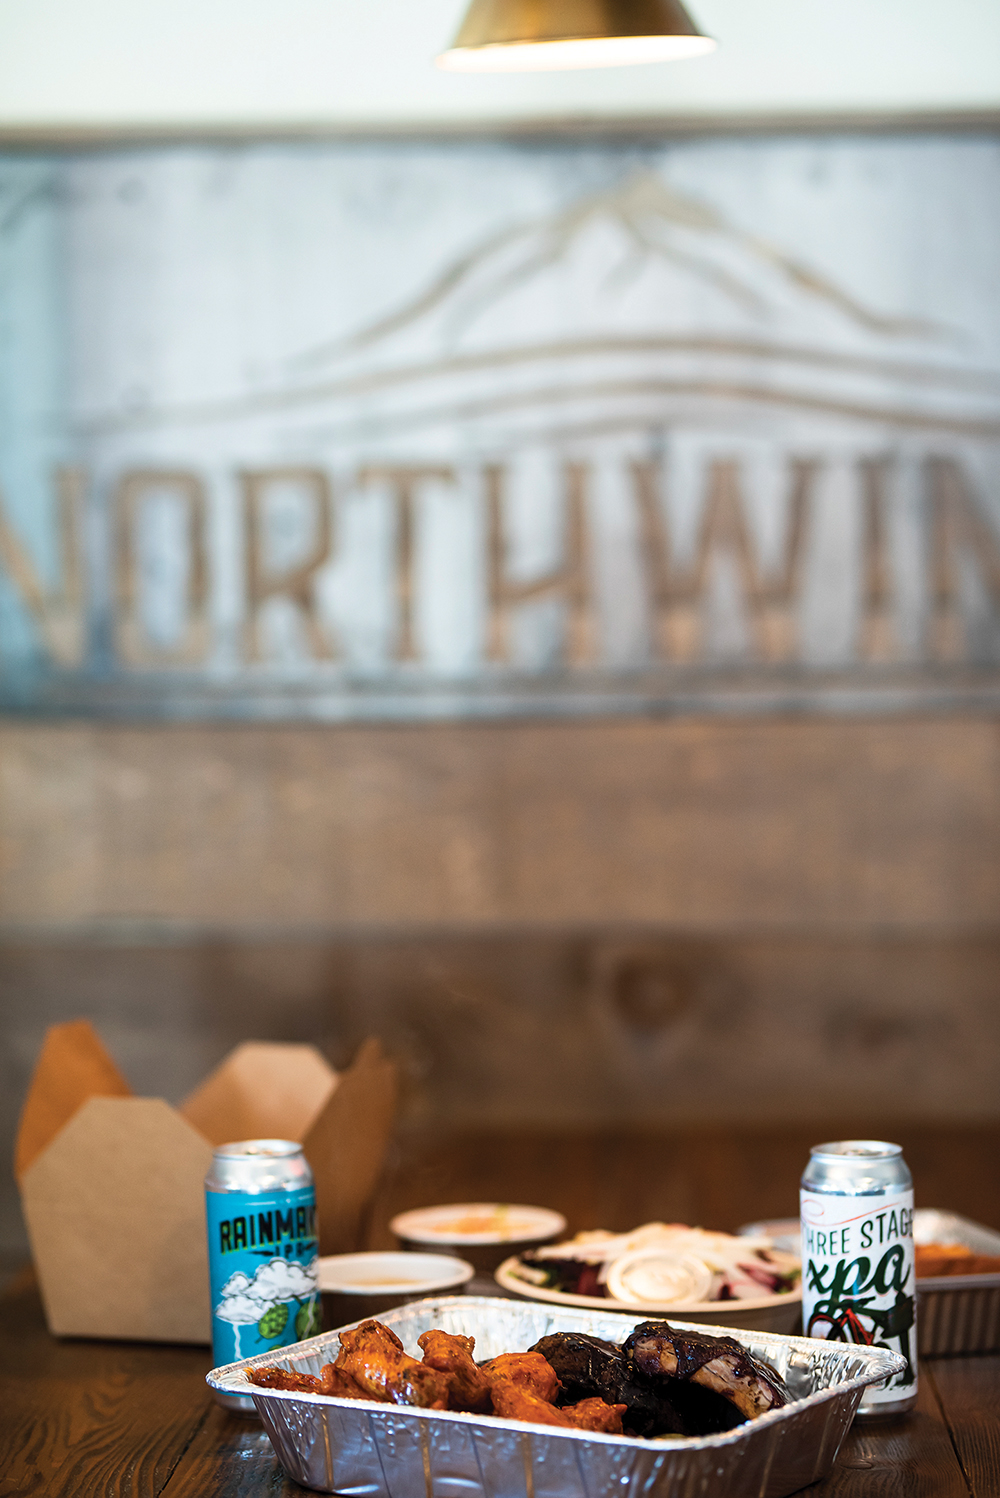 Northwinds’ other offerings during the pandemic were Beer to Go along with a variety of takeout options.